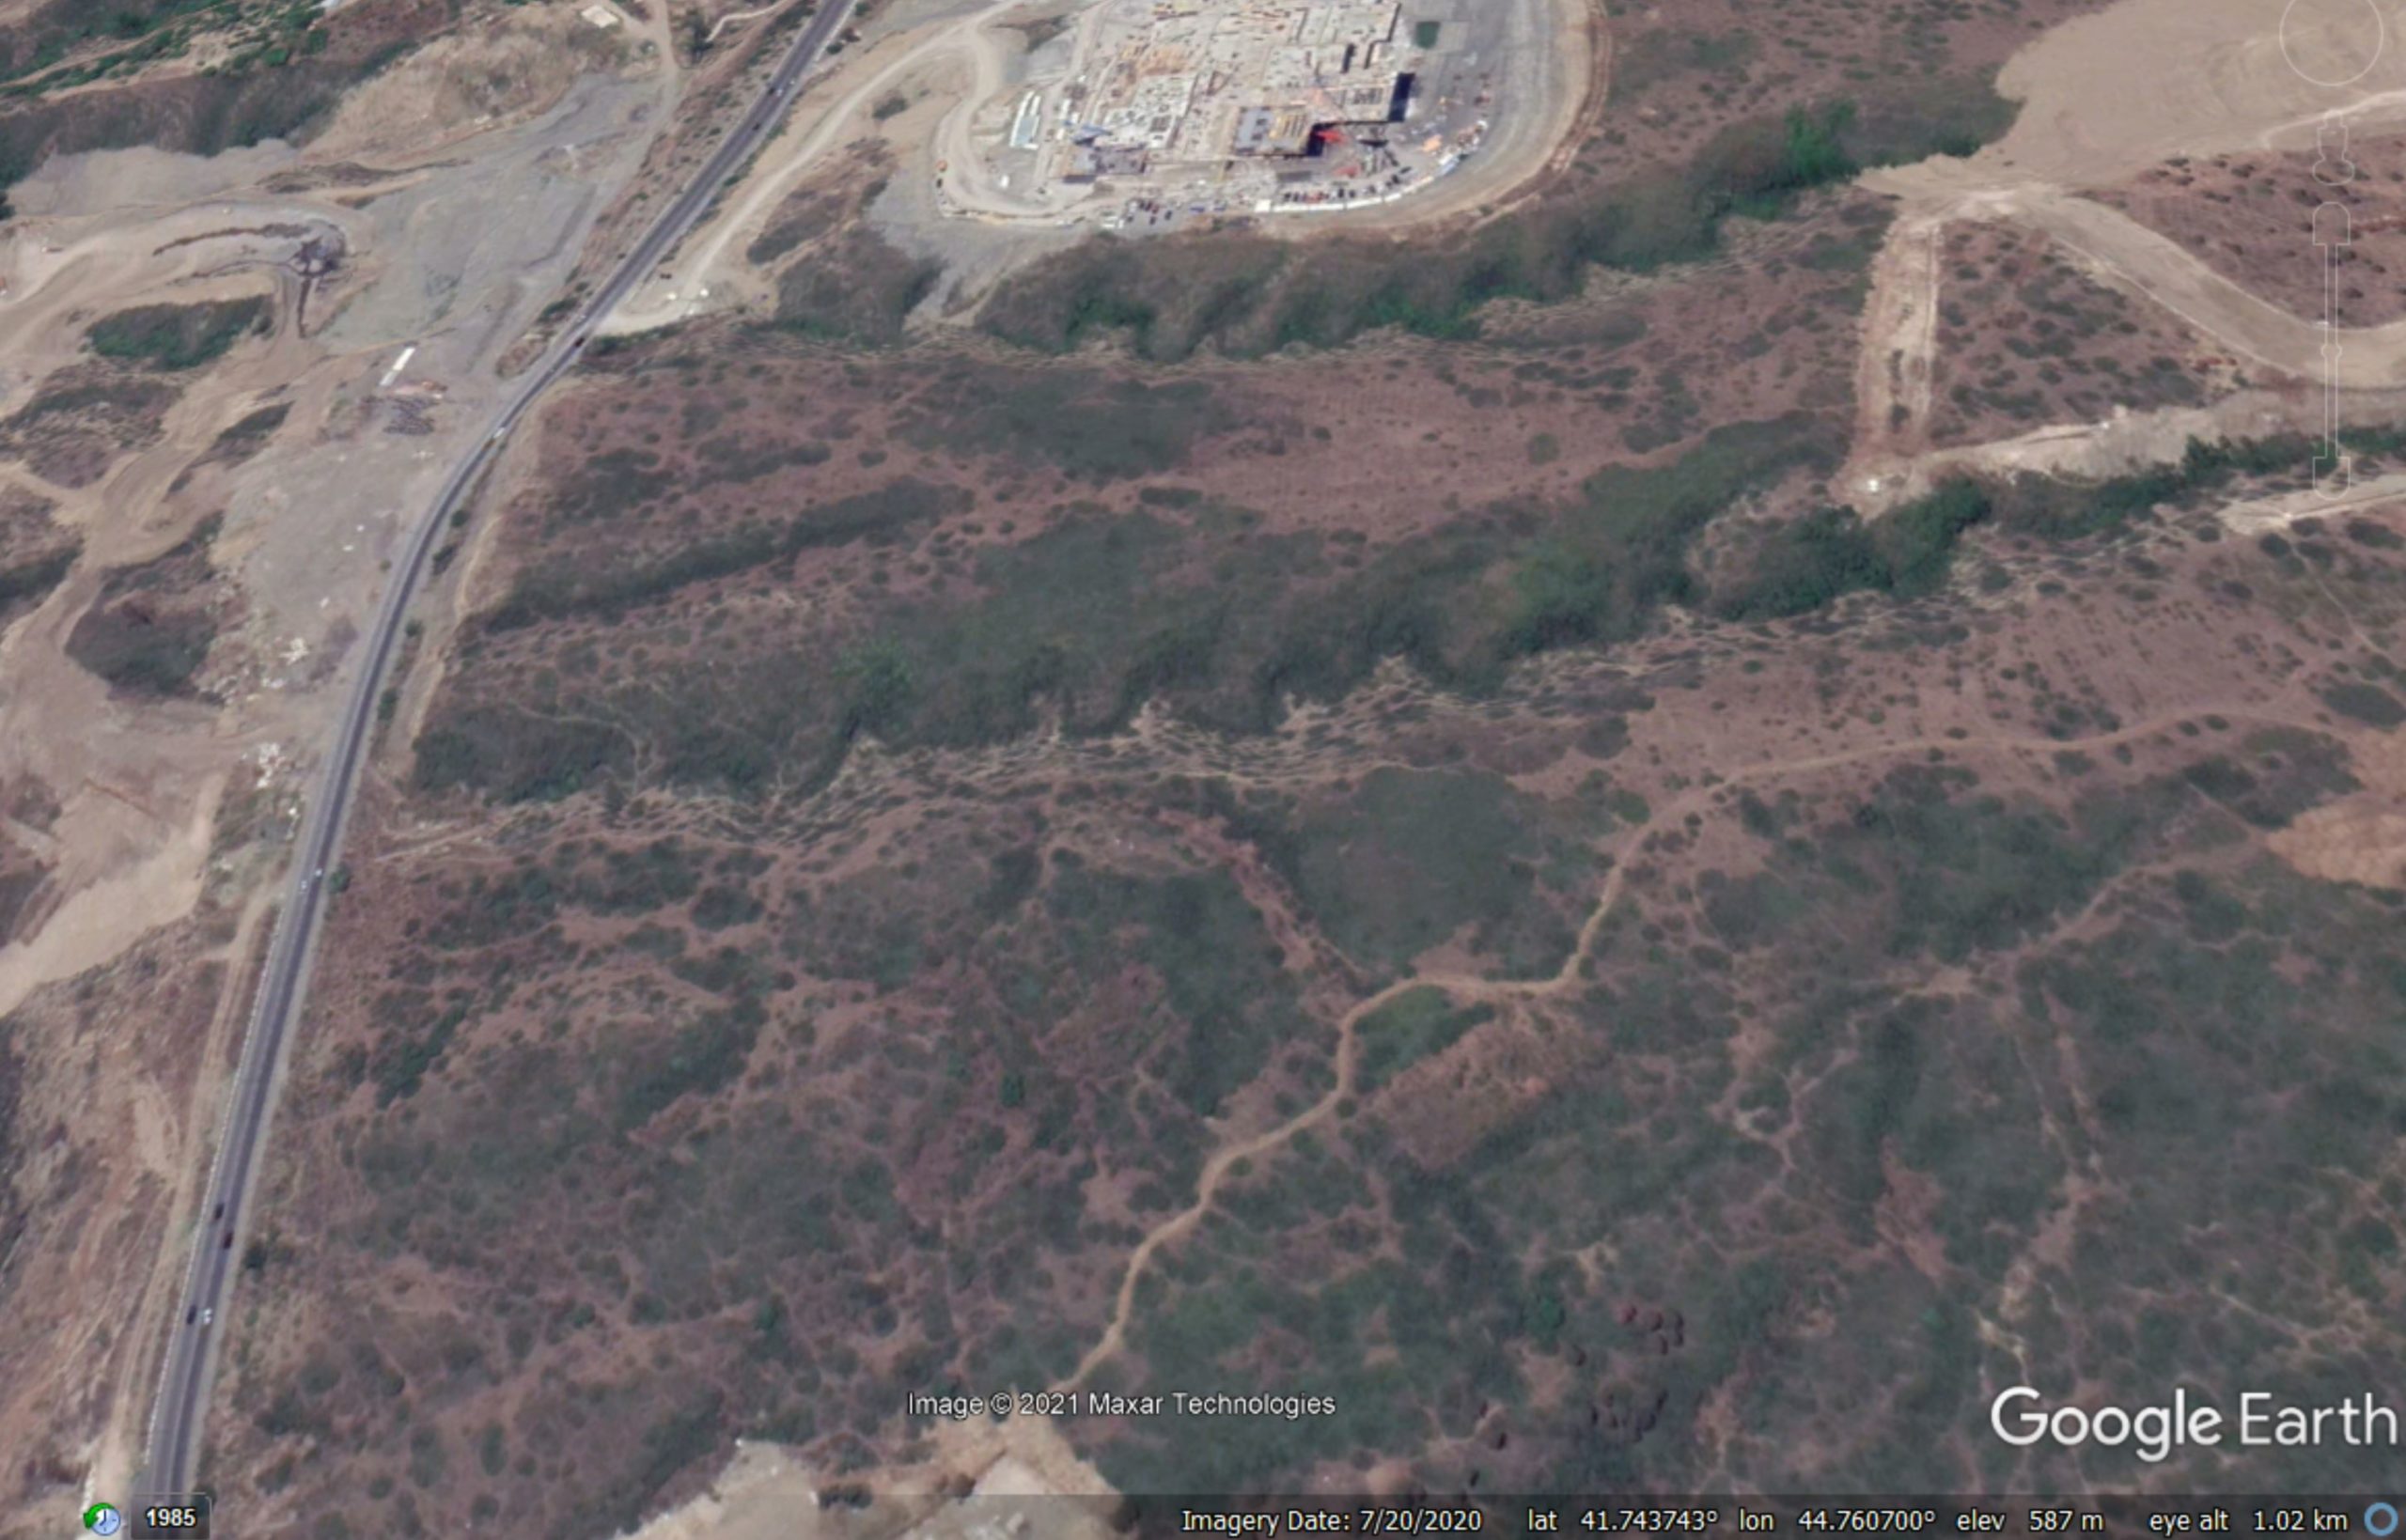 Google Earth image of the site of the landslide in Tblisi